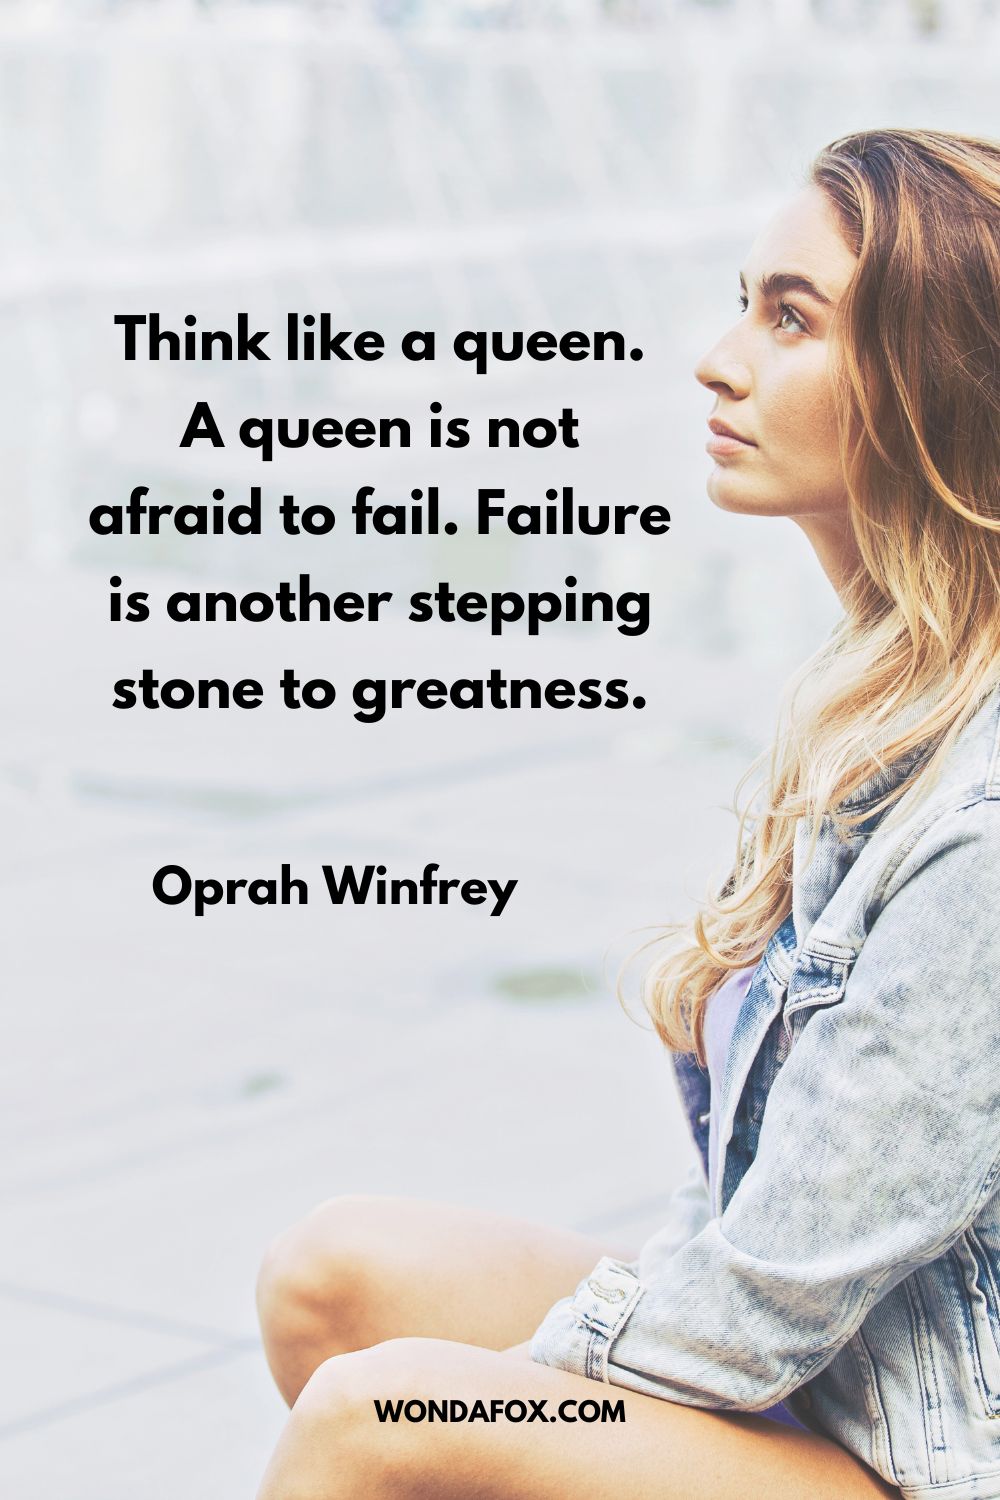 Think like a queen. A queen is not afraid to fail. Failure is another stepping stone to greatness. Oprah Winfrey